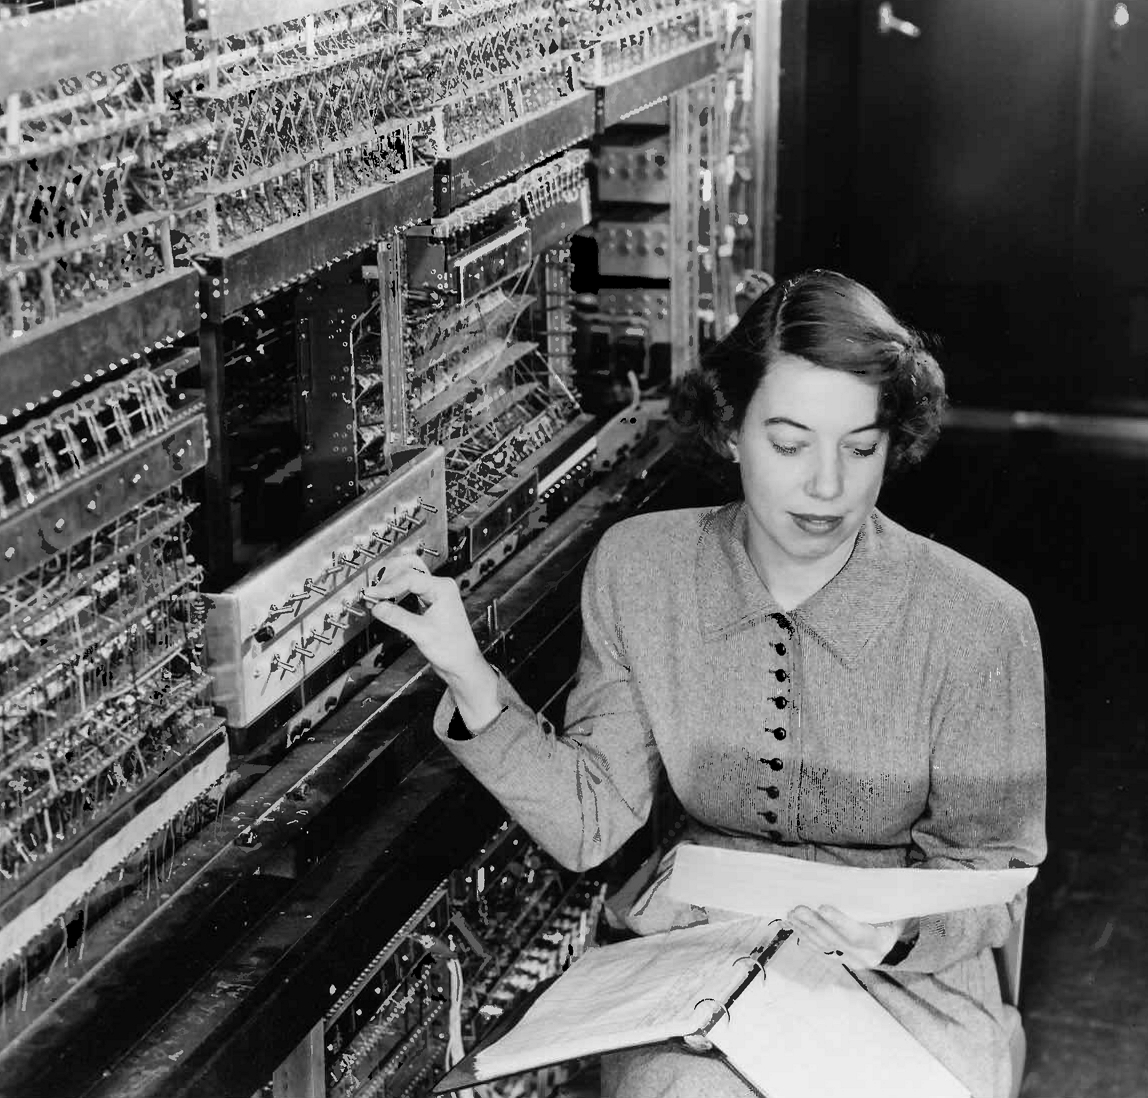 Pictured here, with AVIDAC, one of the first digital computers, is pioneer Argonne computer scientist Jean F. Hall